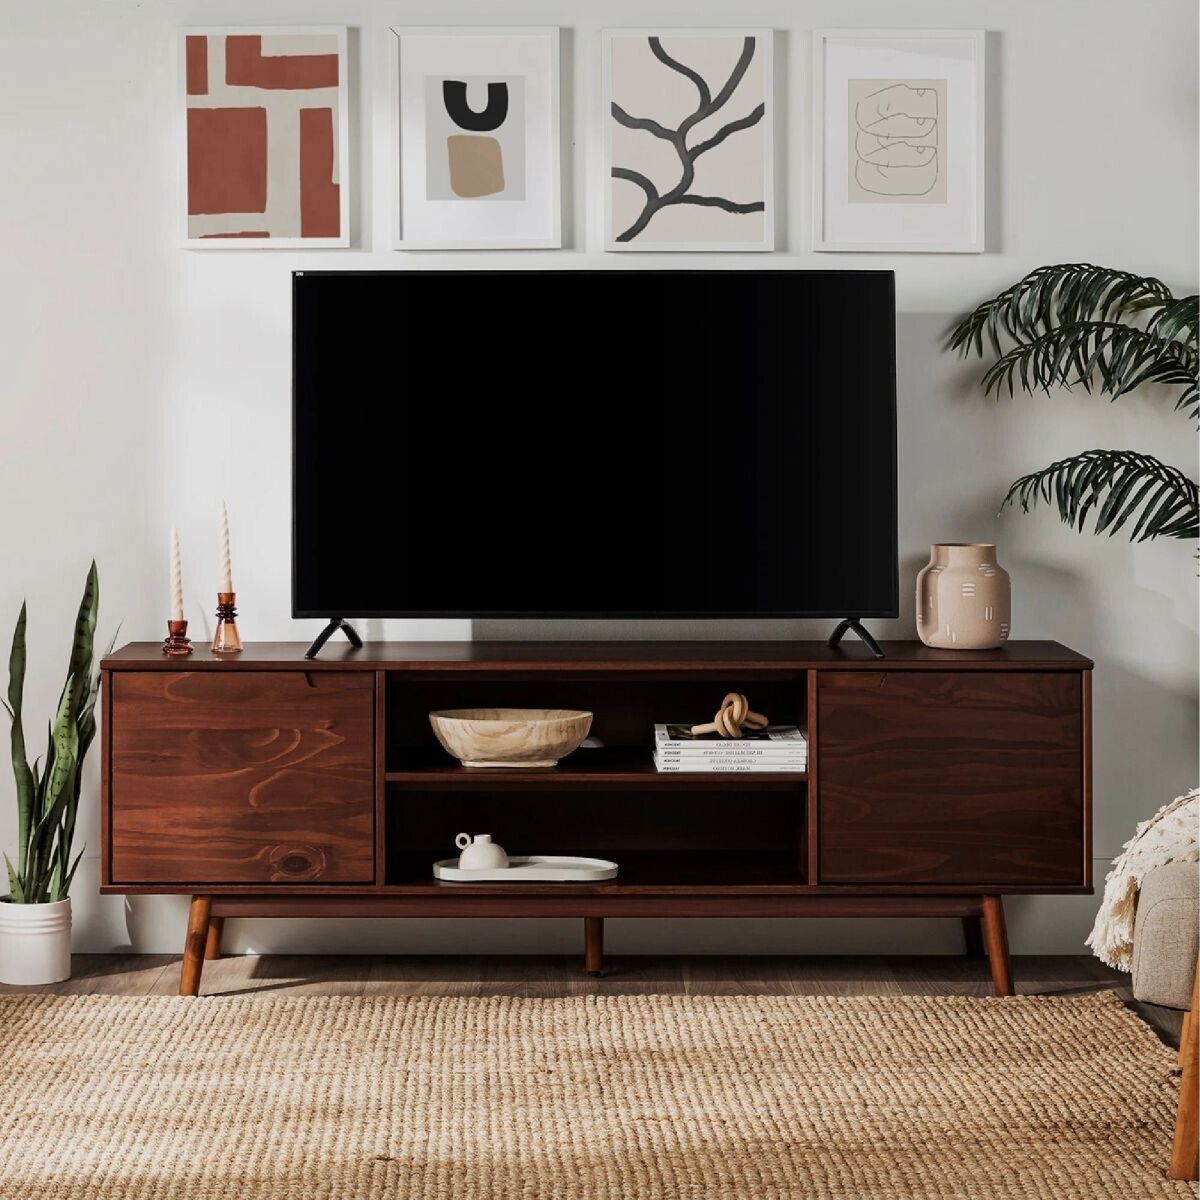 Mid Century Modern Tv Stand Entertainment Center Media Cabinet Solid Wood  Wb 70" | Ebay Within Mid Century Entertainment Centers (View 13 of 15)